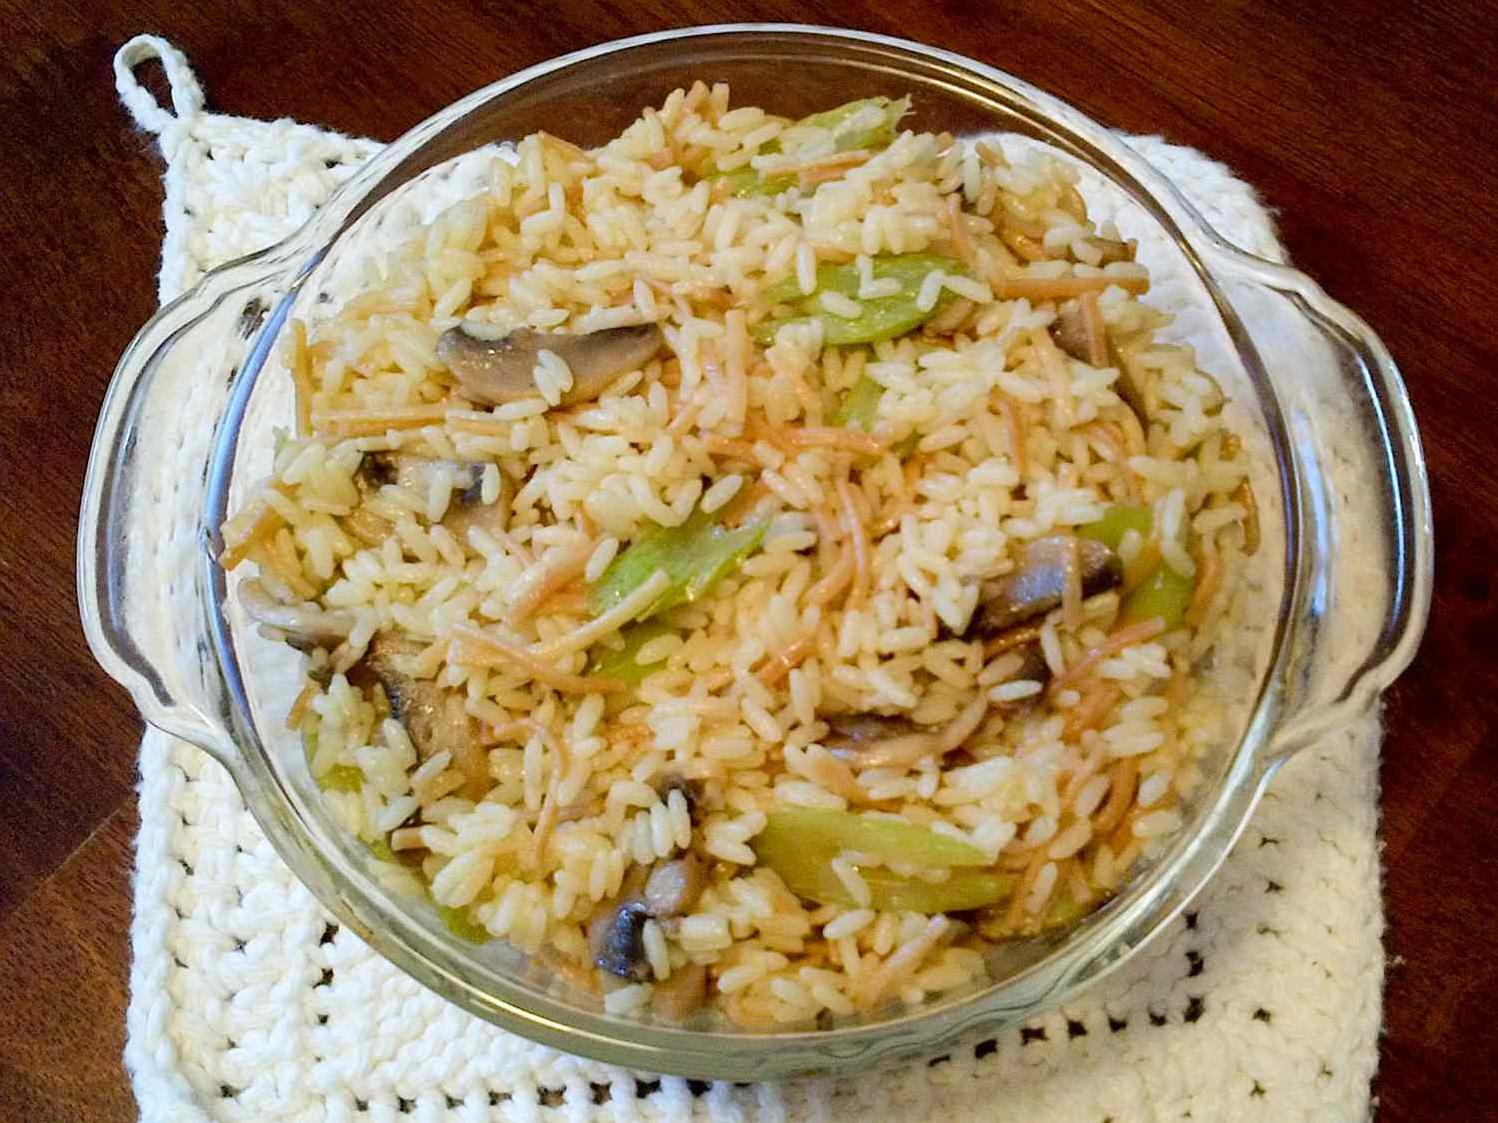  Each forkful of this pilaf is bursting with flavor and texture.